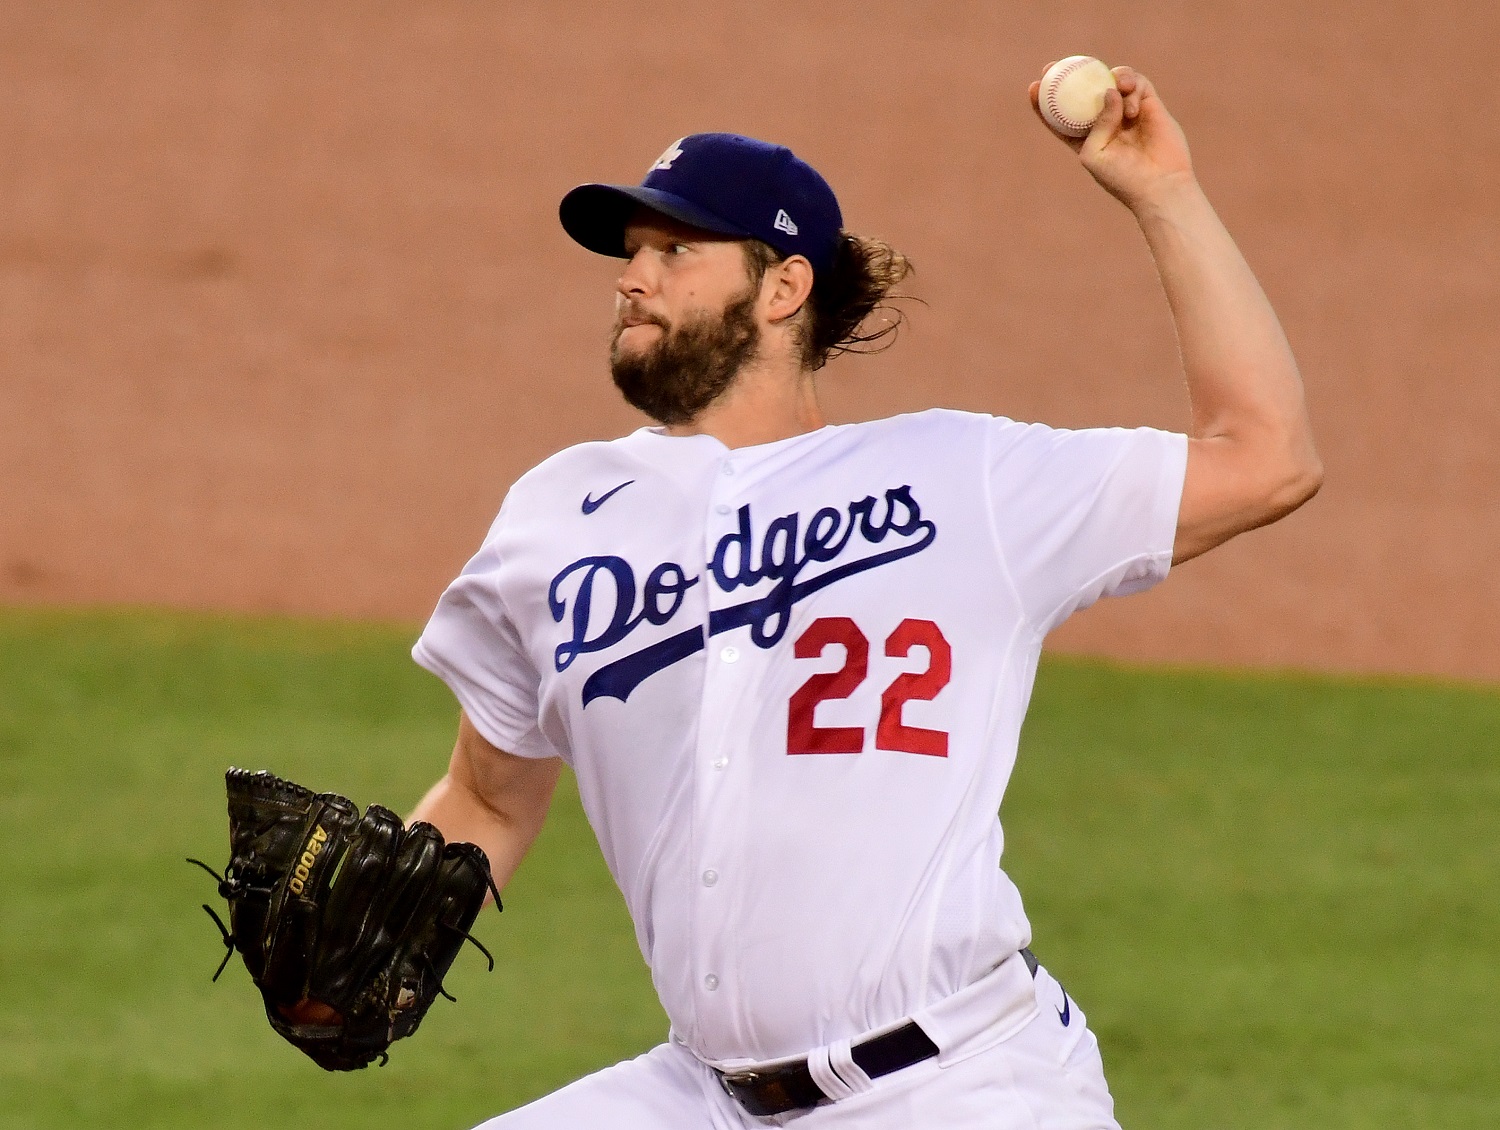 Dodgers' Clayton Kershaw Shares Never Before Heard Stories About